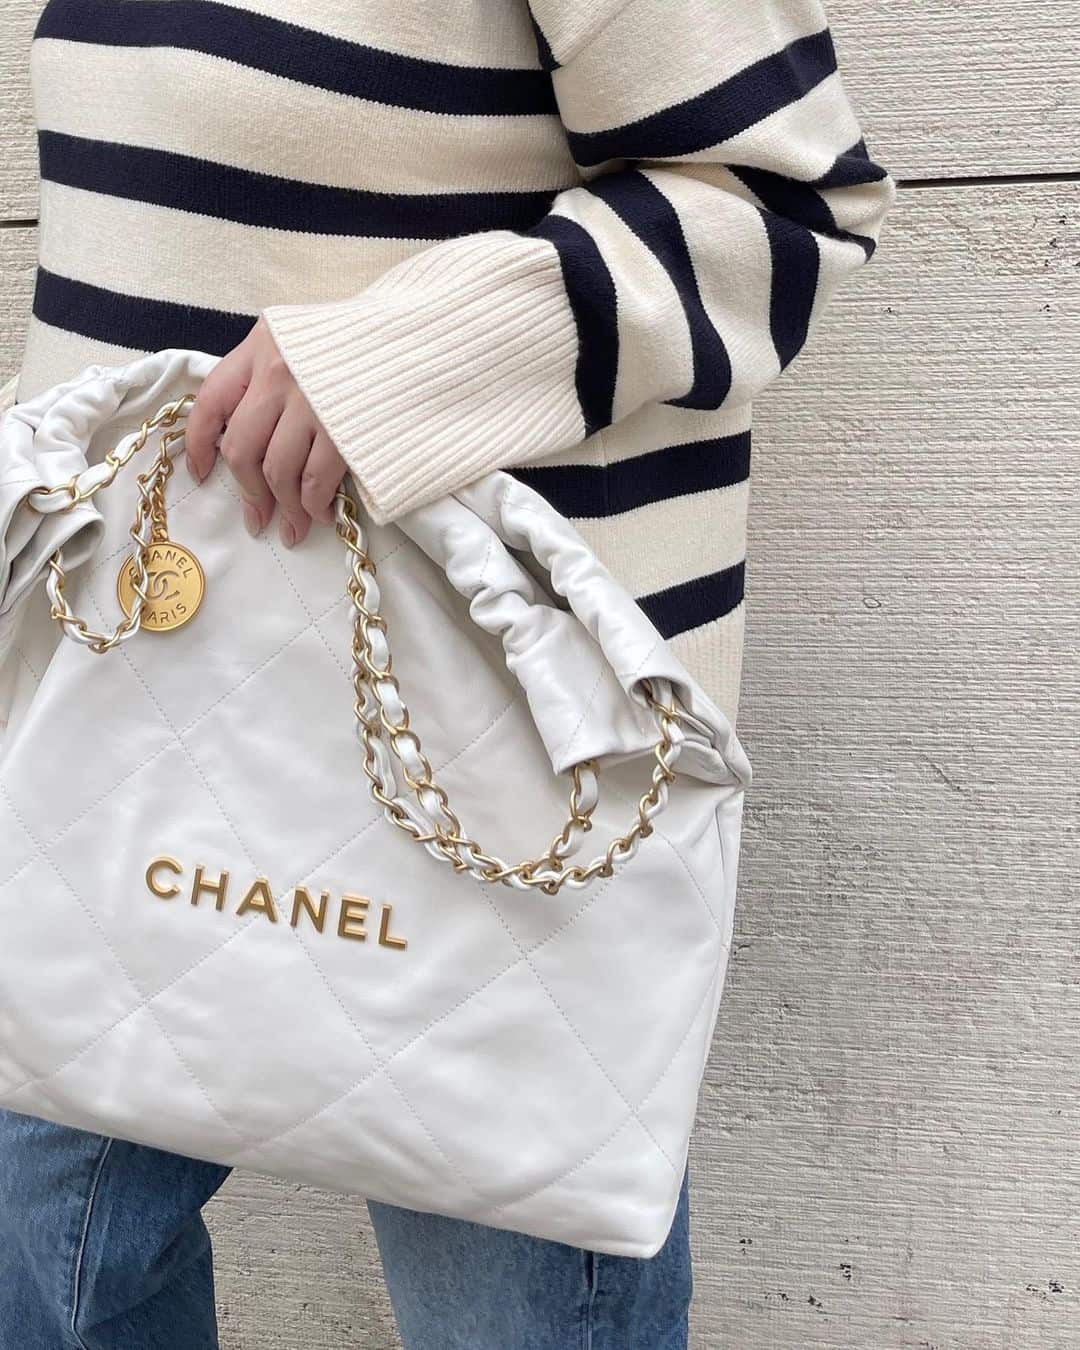 Is The Chanel 22 Bag Worth The Price? • Petite In Paris